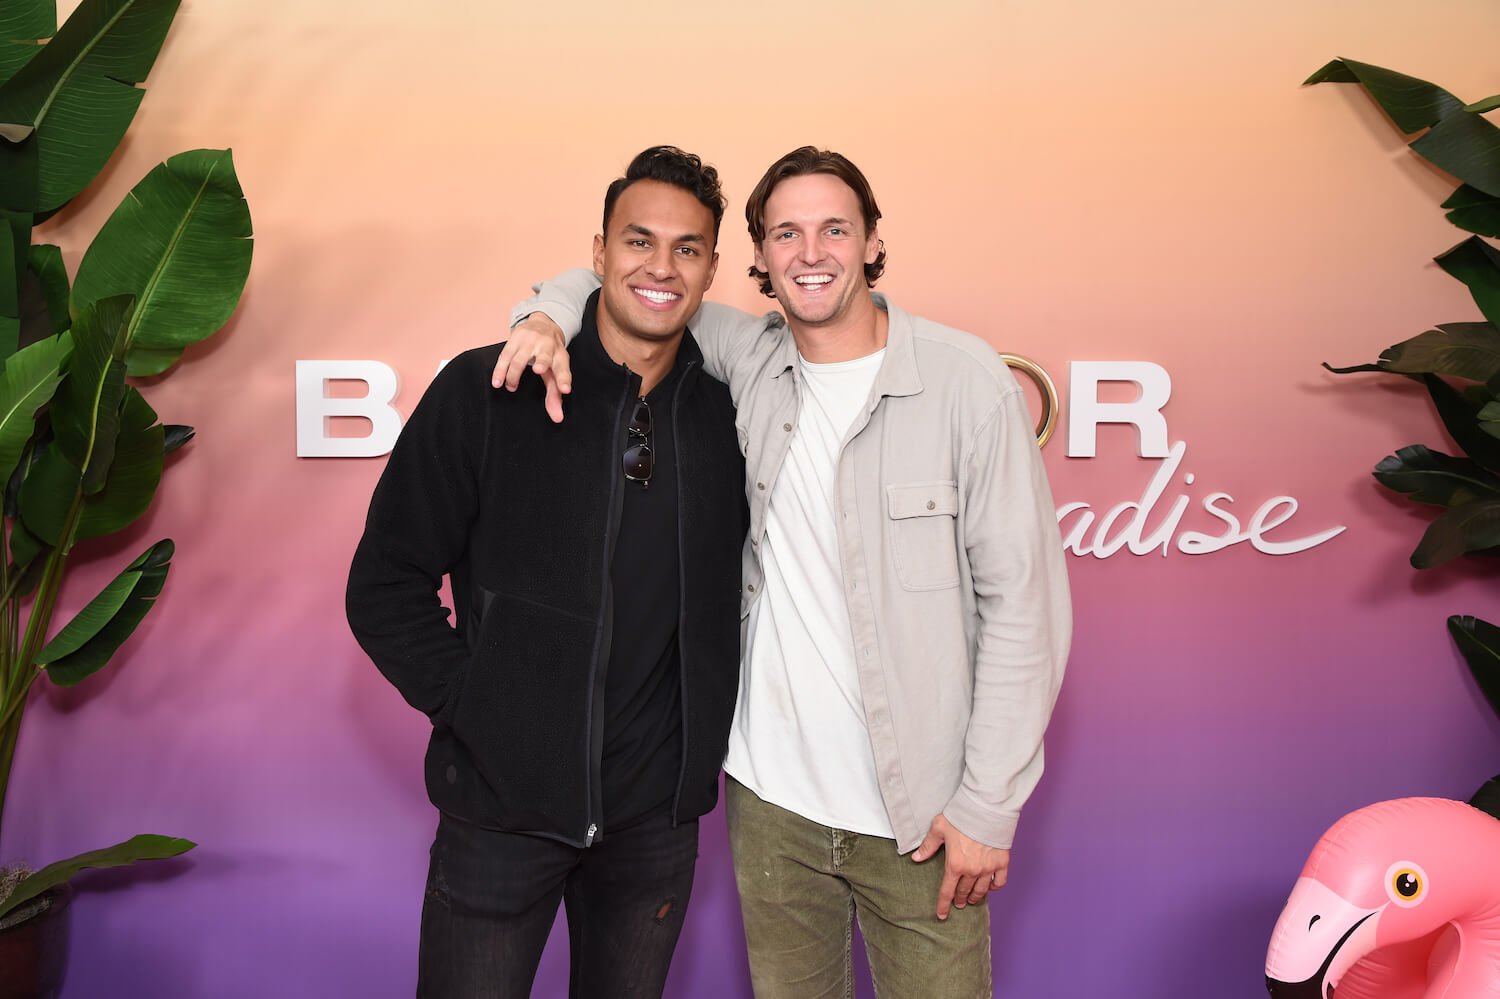 Logan Palmer and Aaron Clancy posing together in front of a 'Bachelor in Paradise' backdrop 